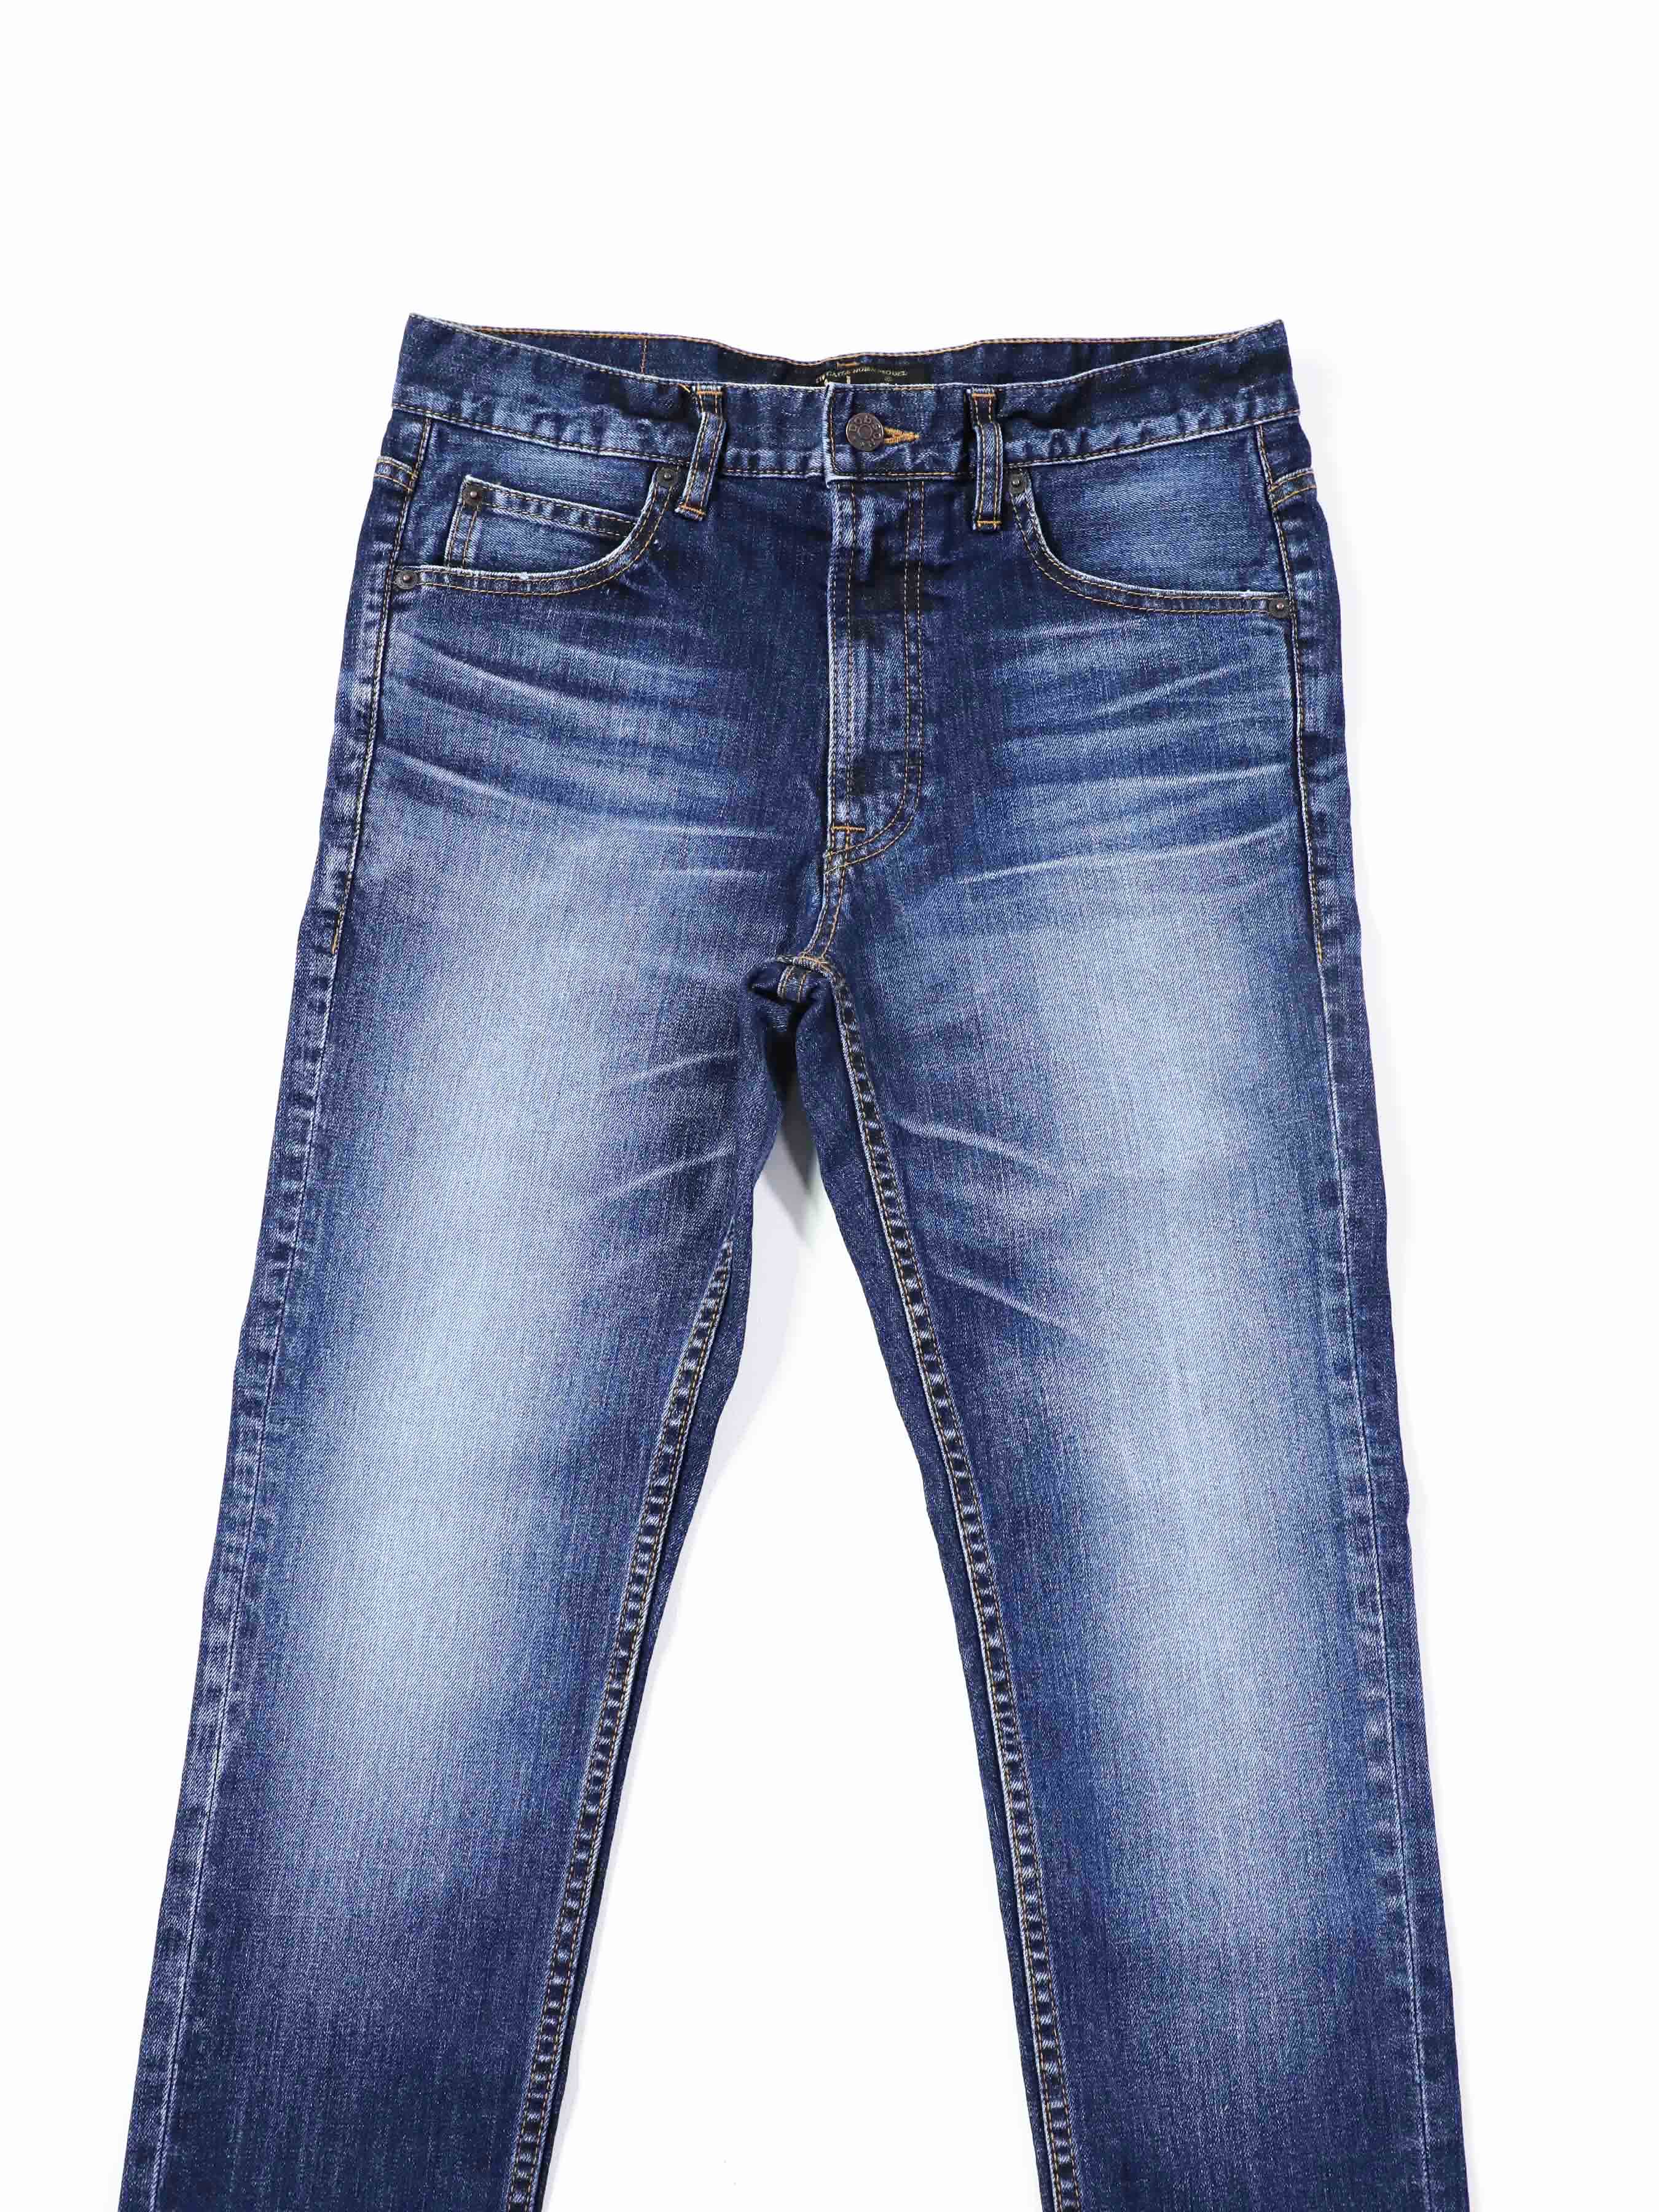 Premium Jeans Tapered Straight Distressed Blue Color/Men's